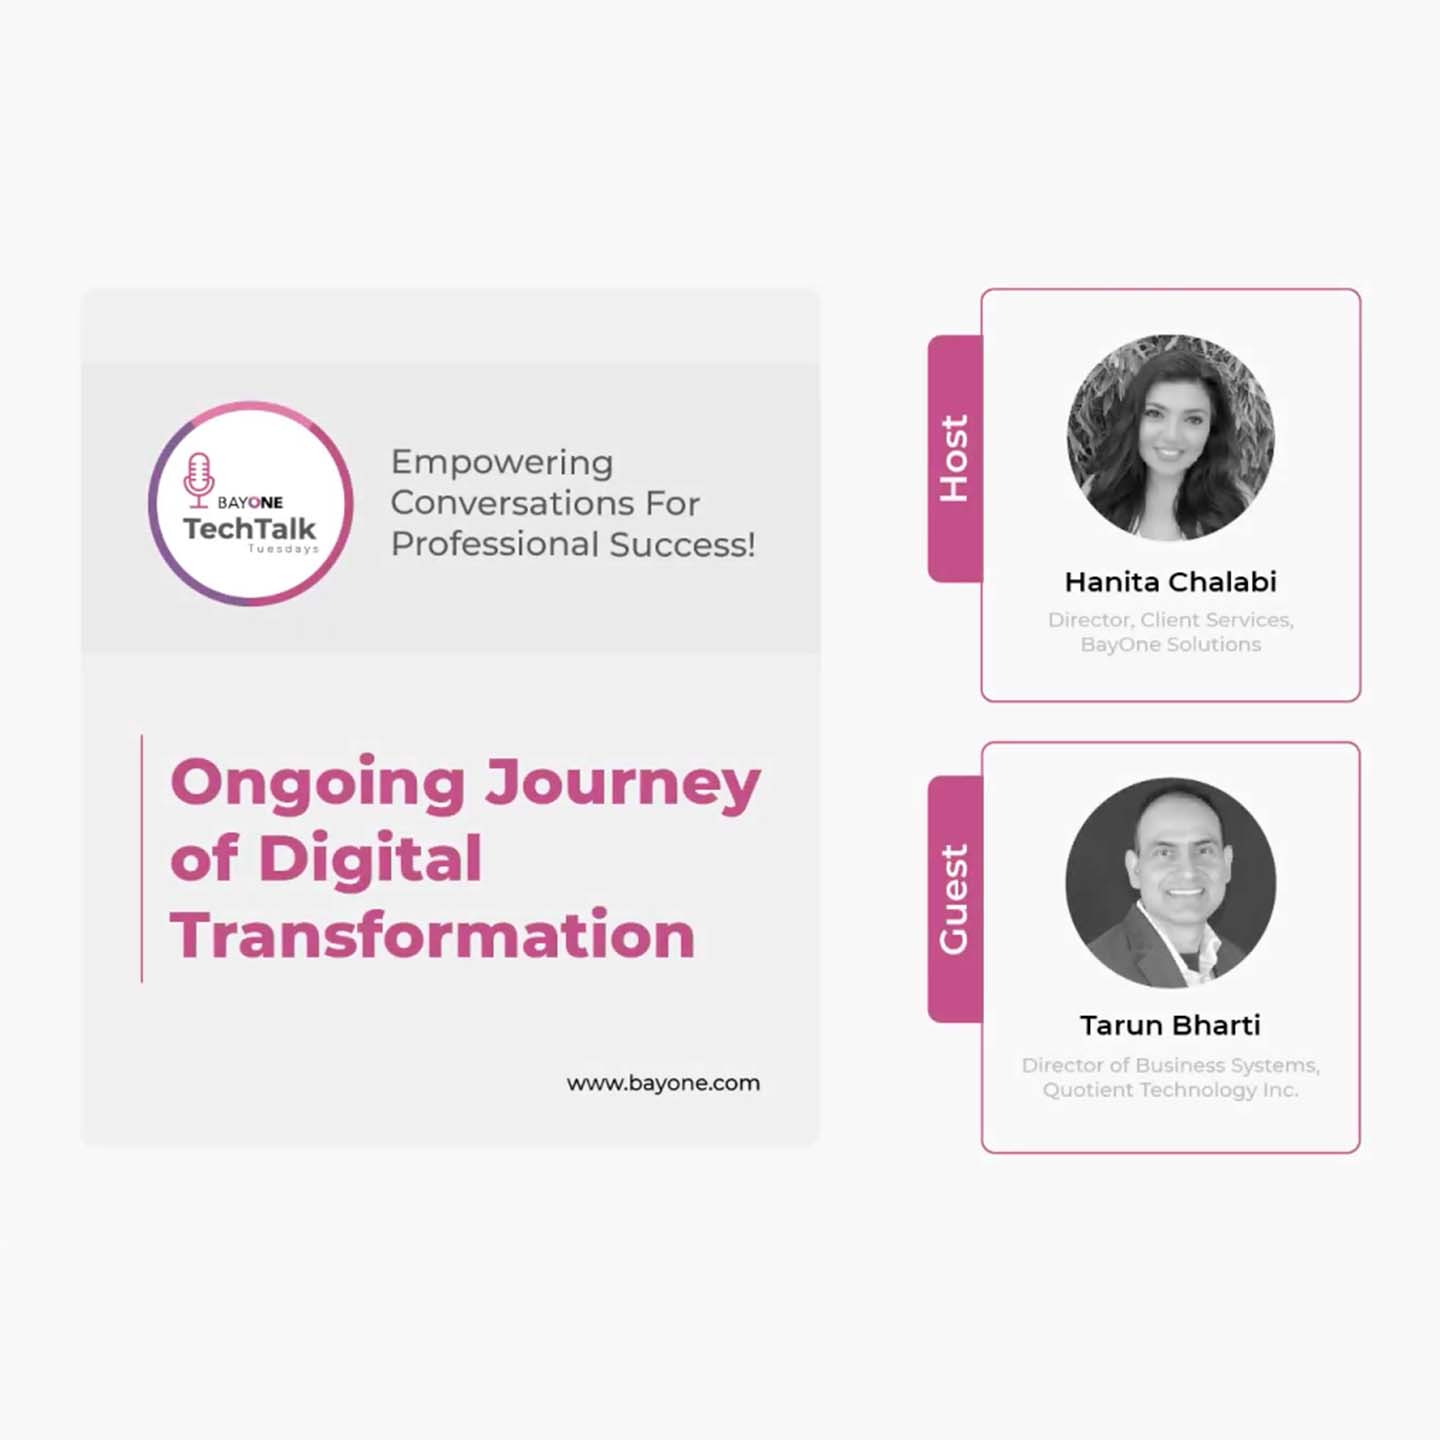 Ongoing Journey of Digital Transformation